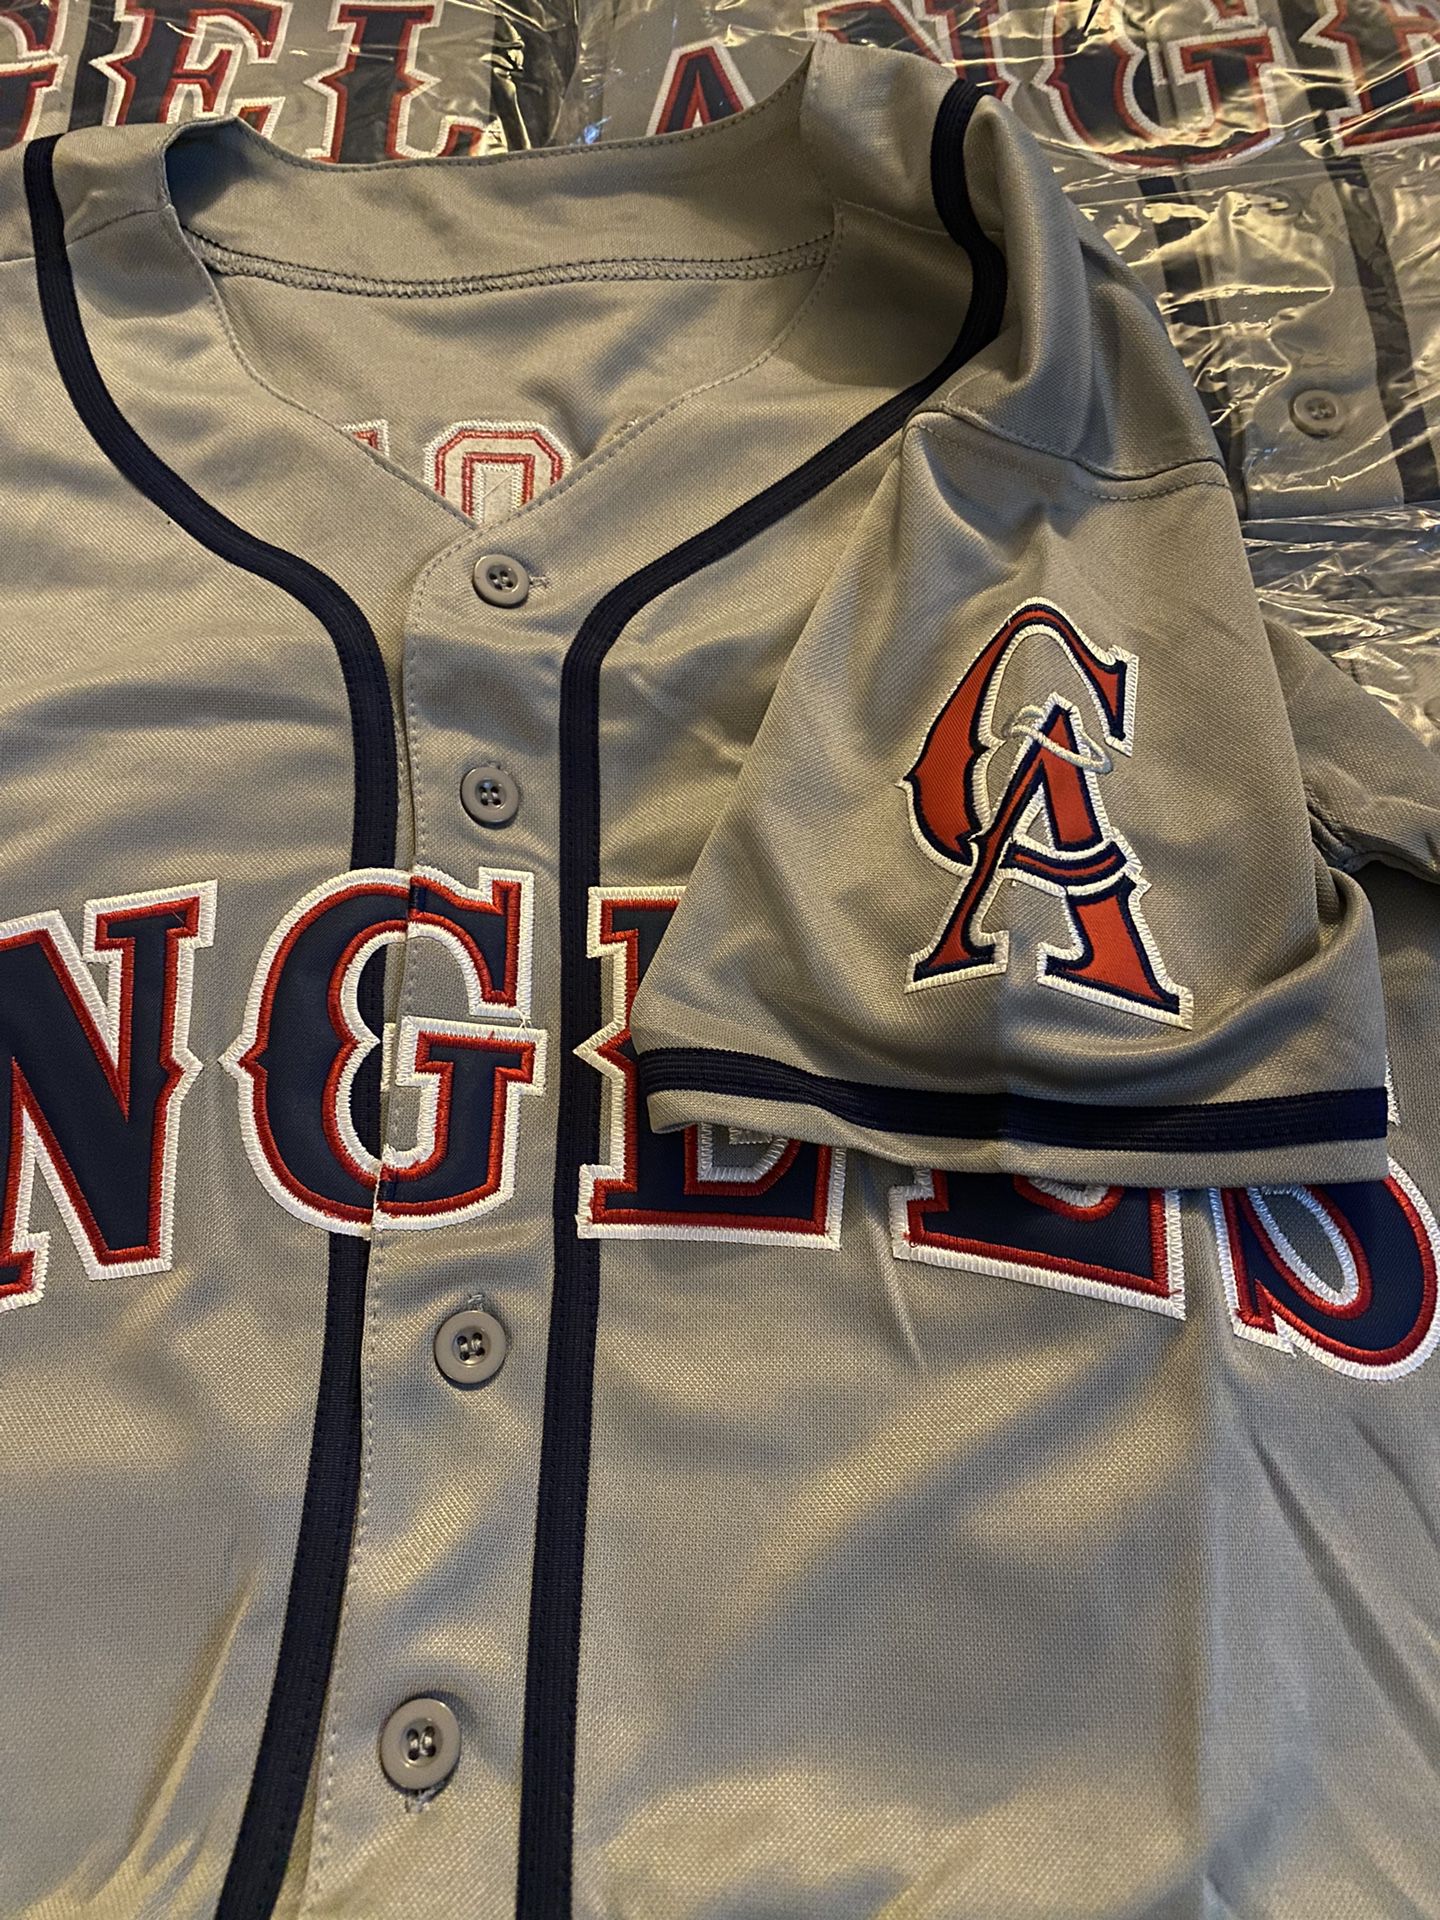 Vintage ANGELS ALL STAR GAME JERSEY LEE XL for Sale in Perris, CA - OfferUp